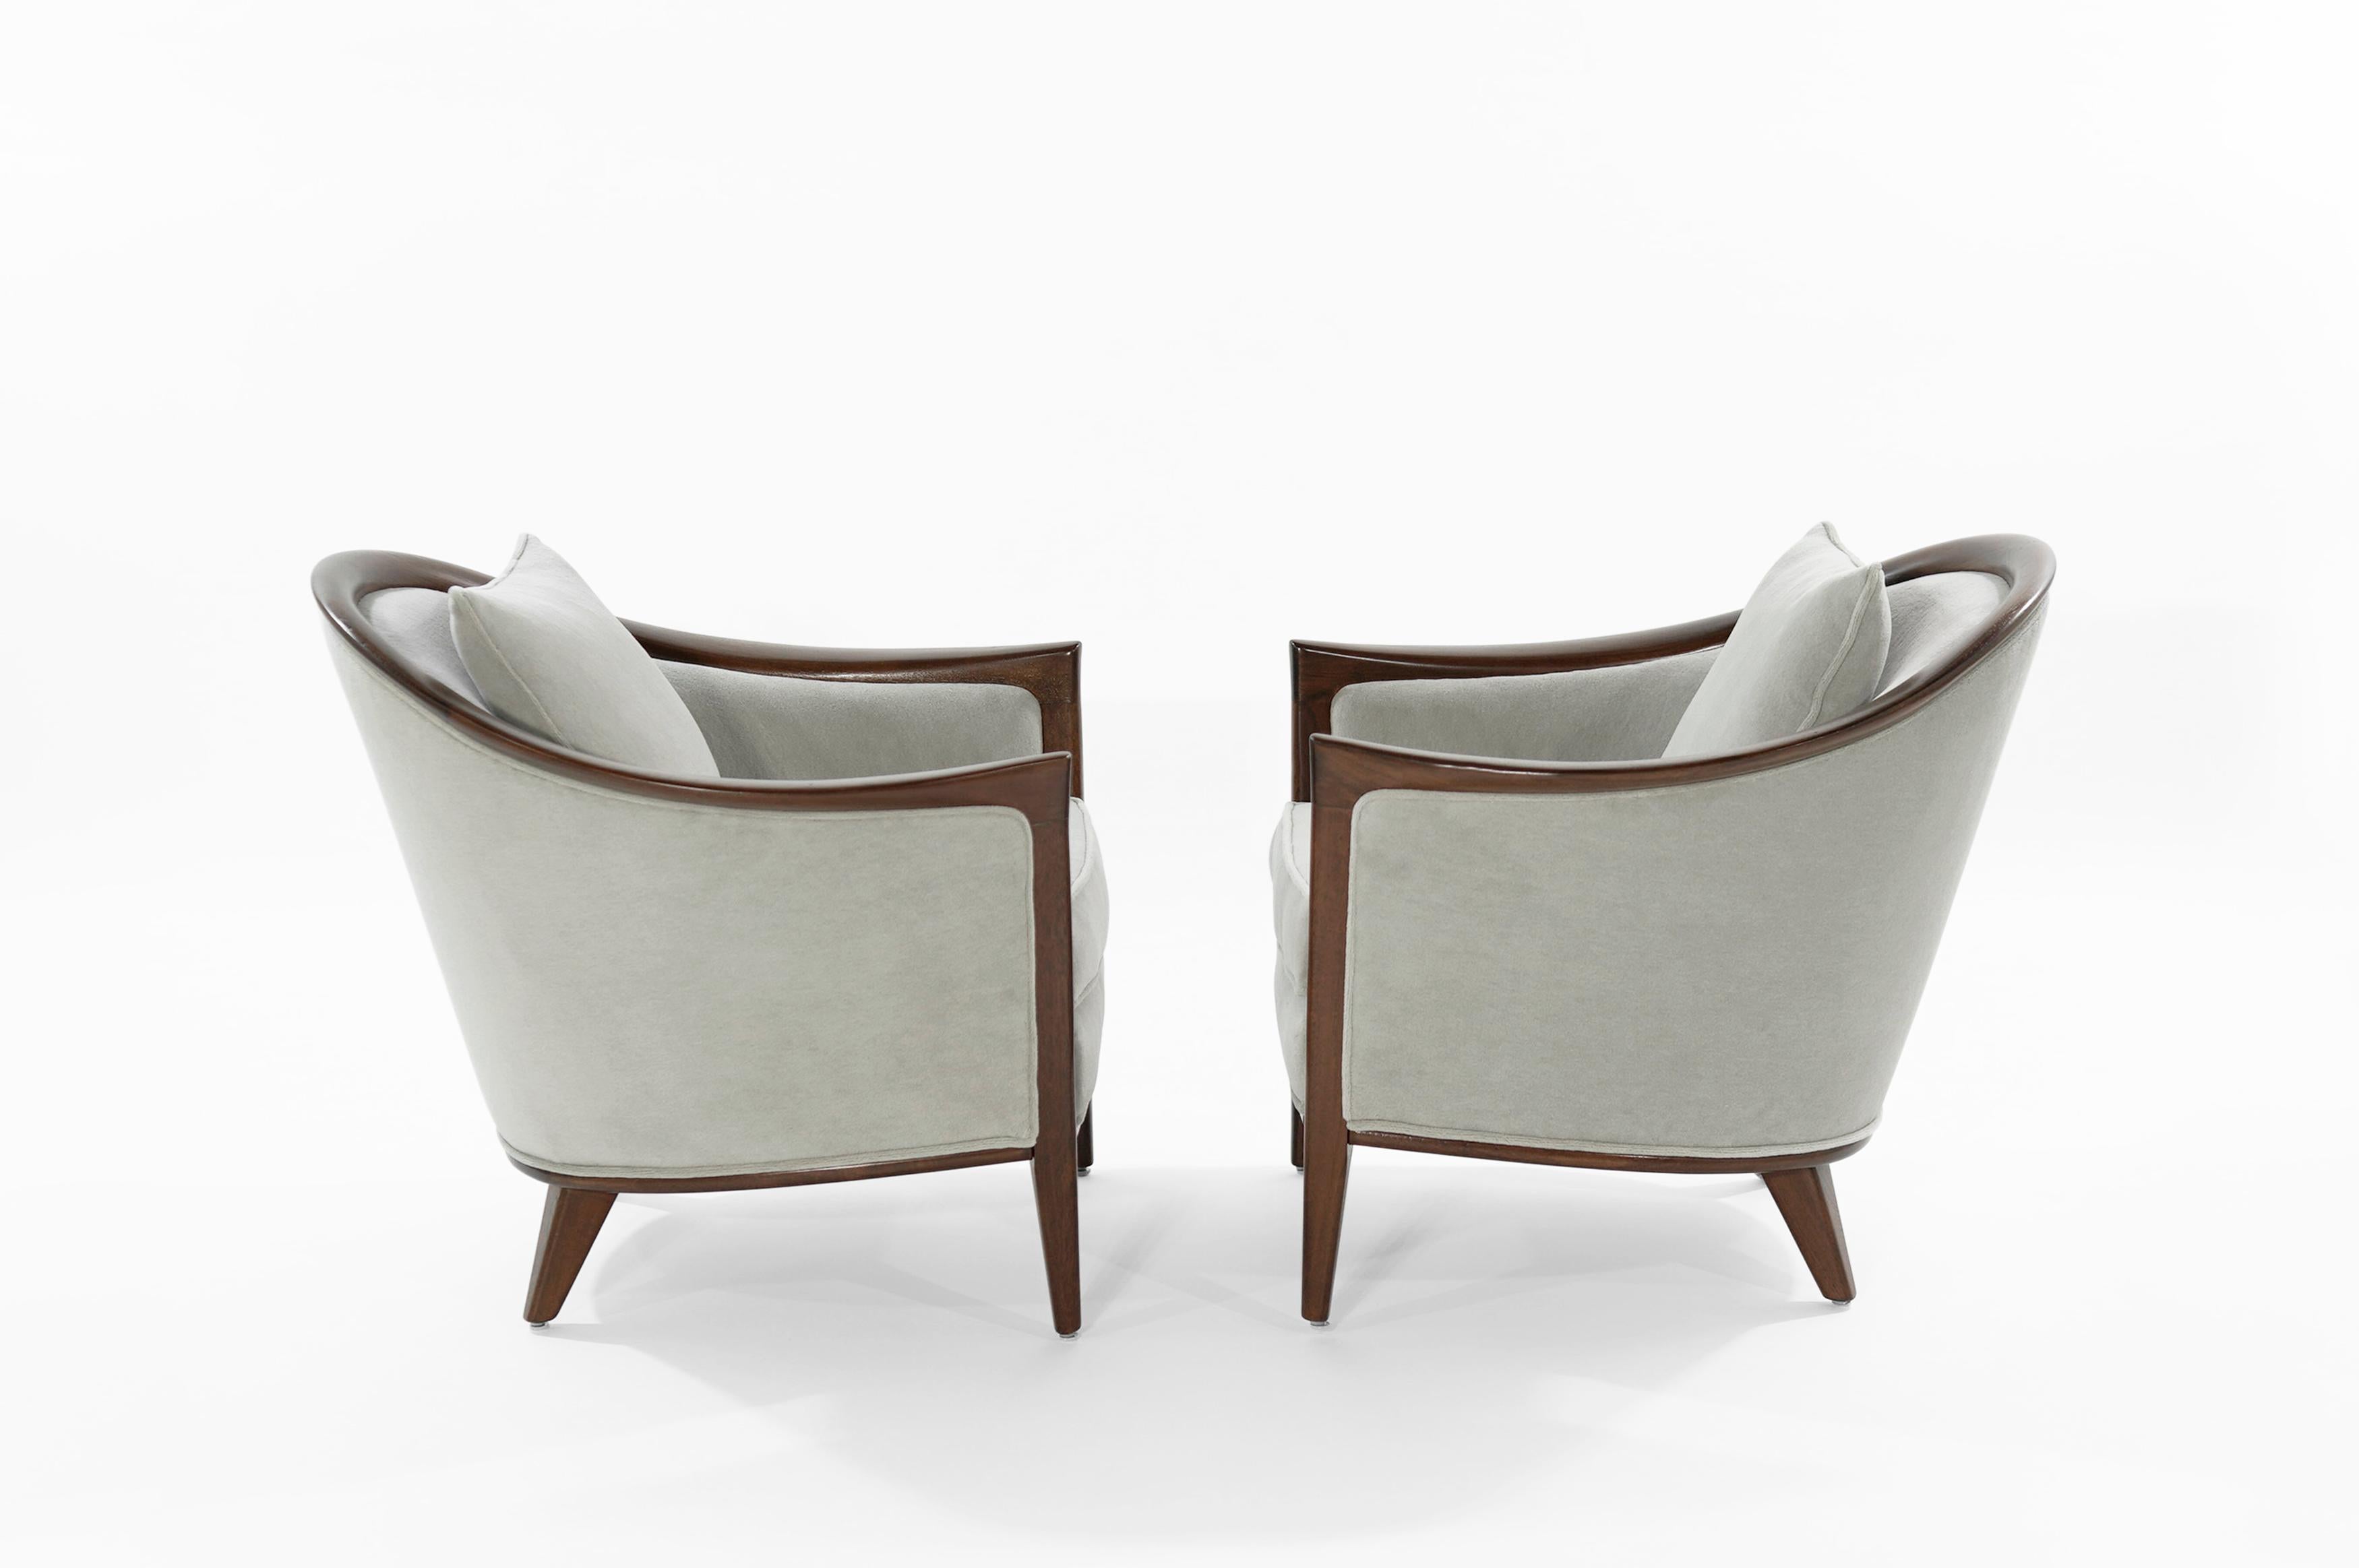 Pair of fully restored lounge chairs featuring sculptural walnut framing and lumbar support.
Newly upholstered in grey alpaca velvet by Holly Hunt.